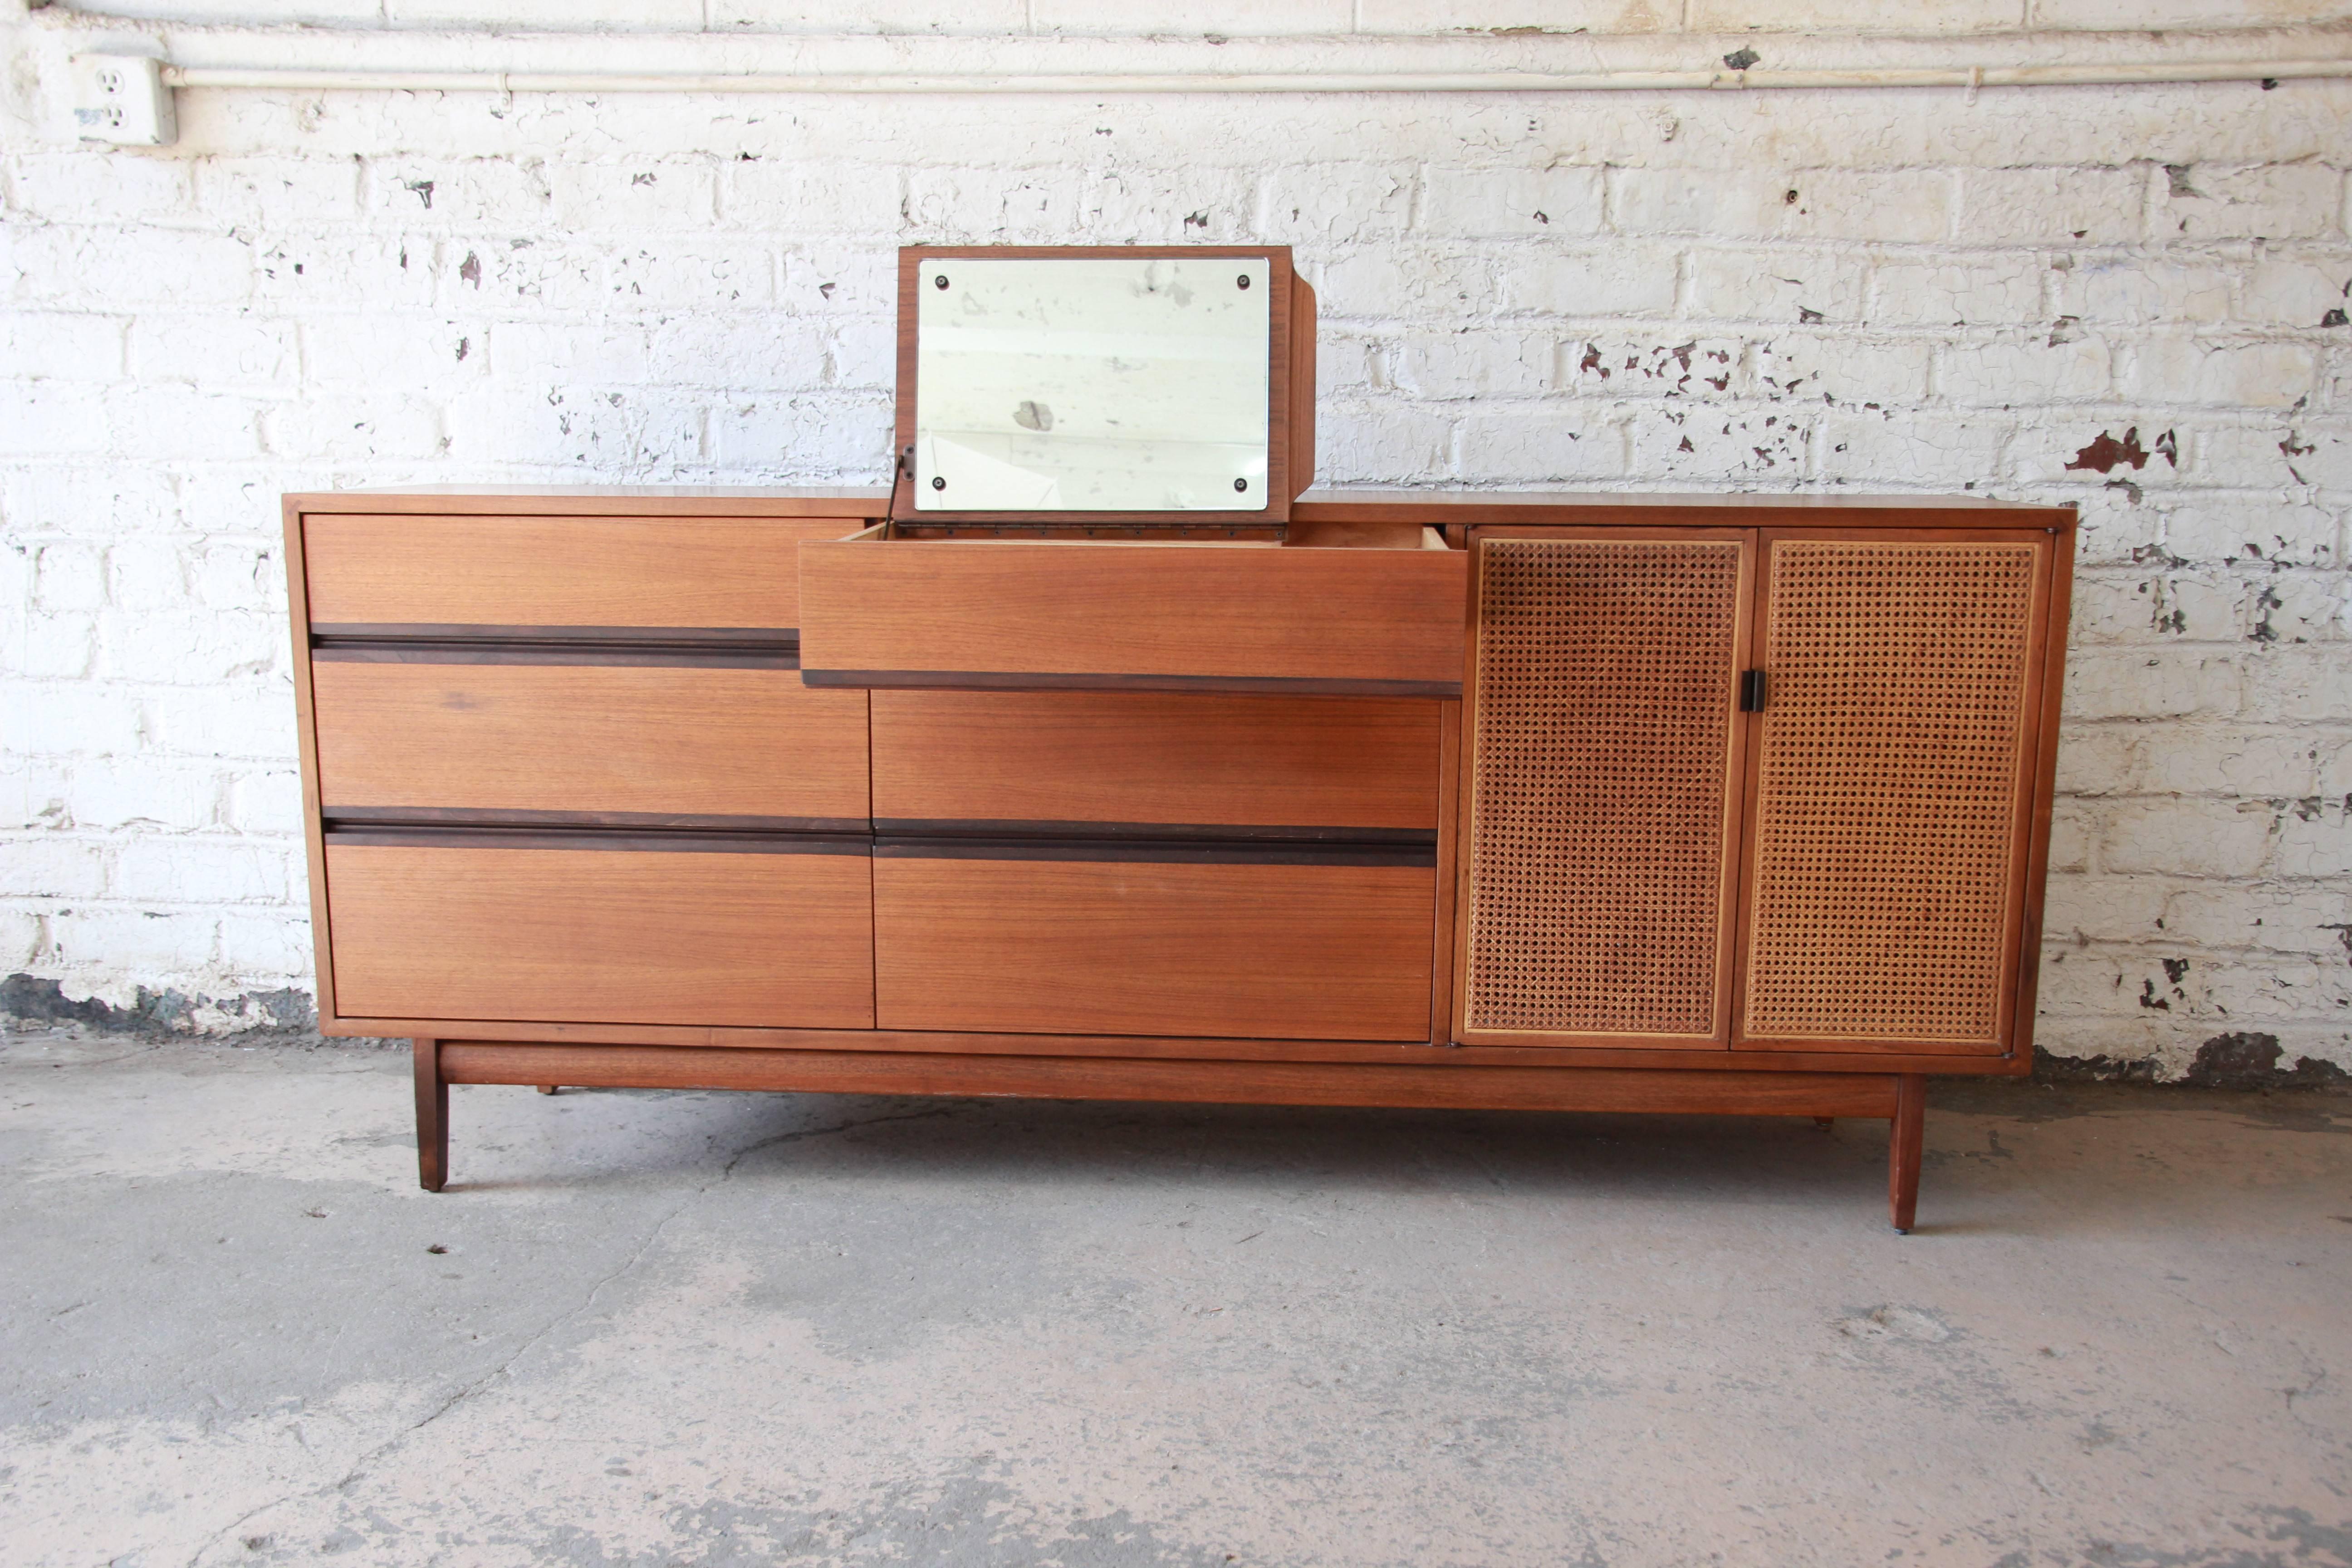 A gorgeous Mid-Century Modern walnut and cane dresser or credenza designed by Kipp Stewart for his American Design Foundation line for Calvin Furniture, circa 1950s. The dresser features gorgeous walnut wood grain and sleek Mid-Century Modern